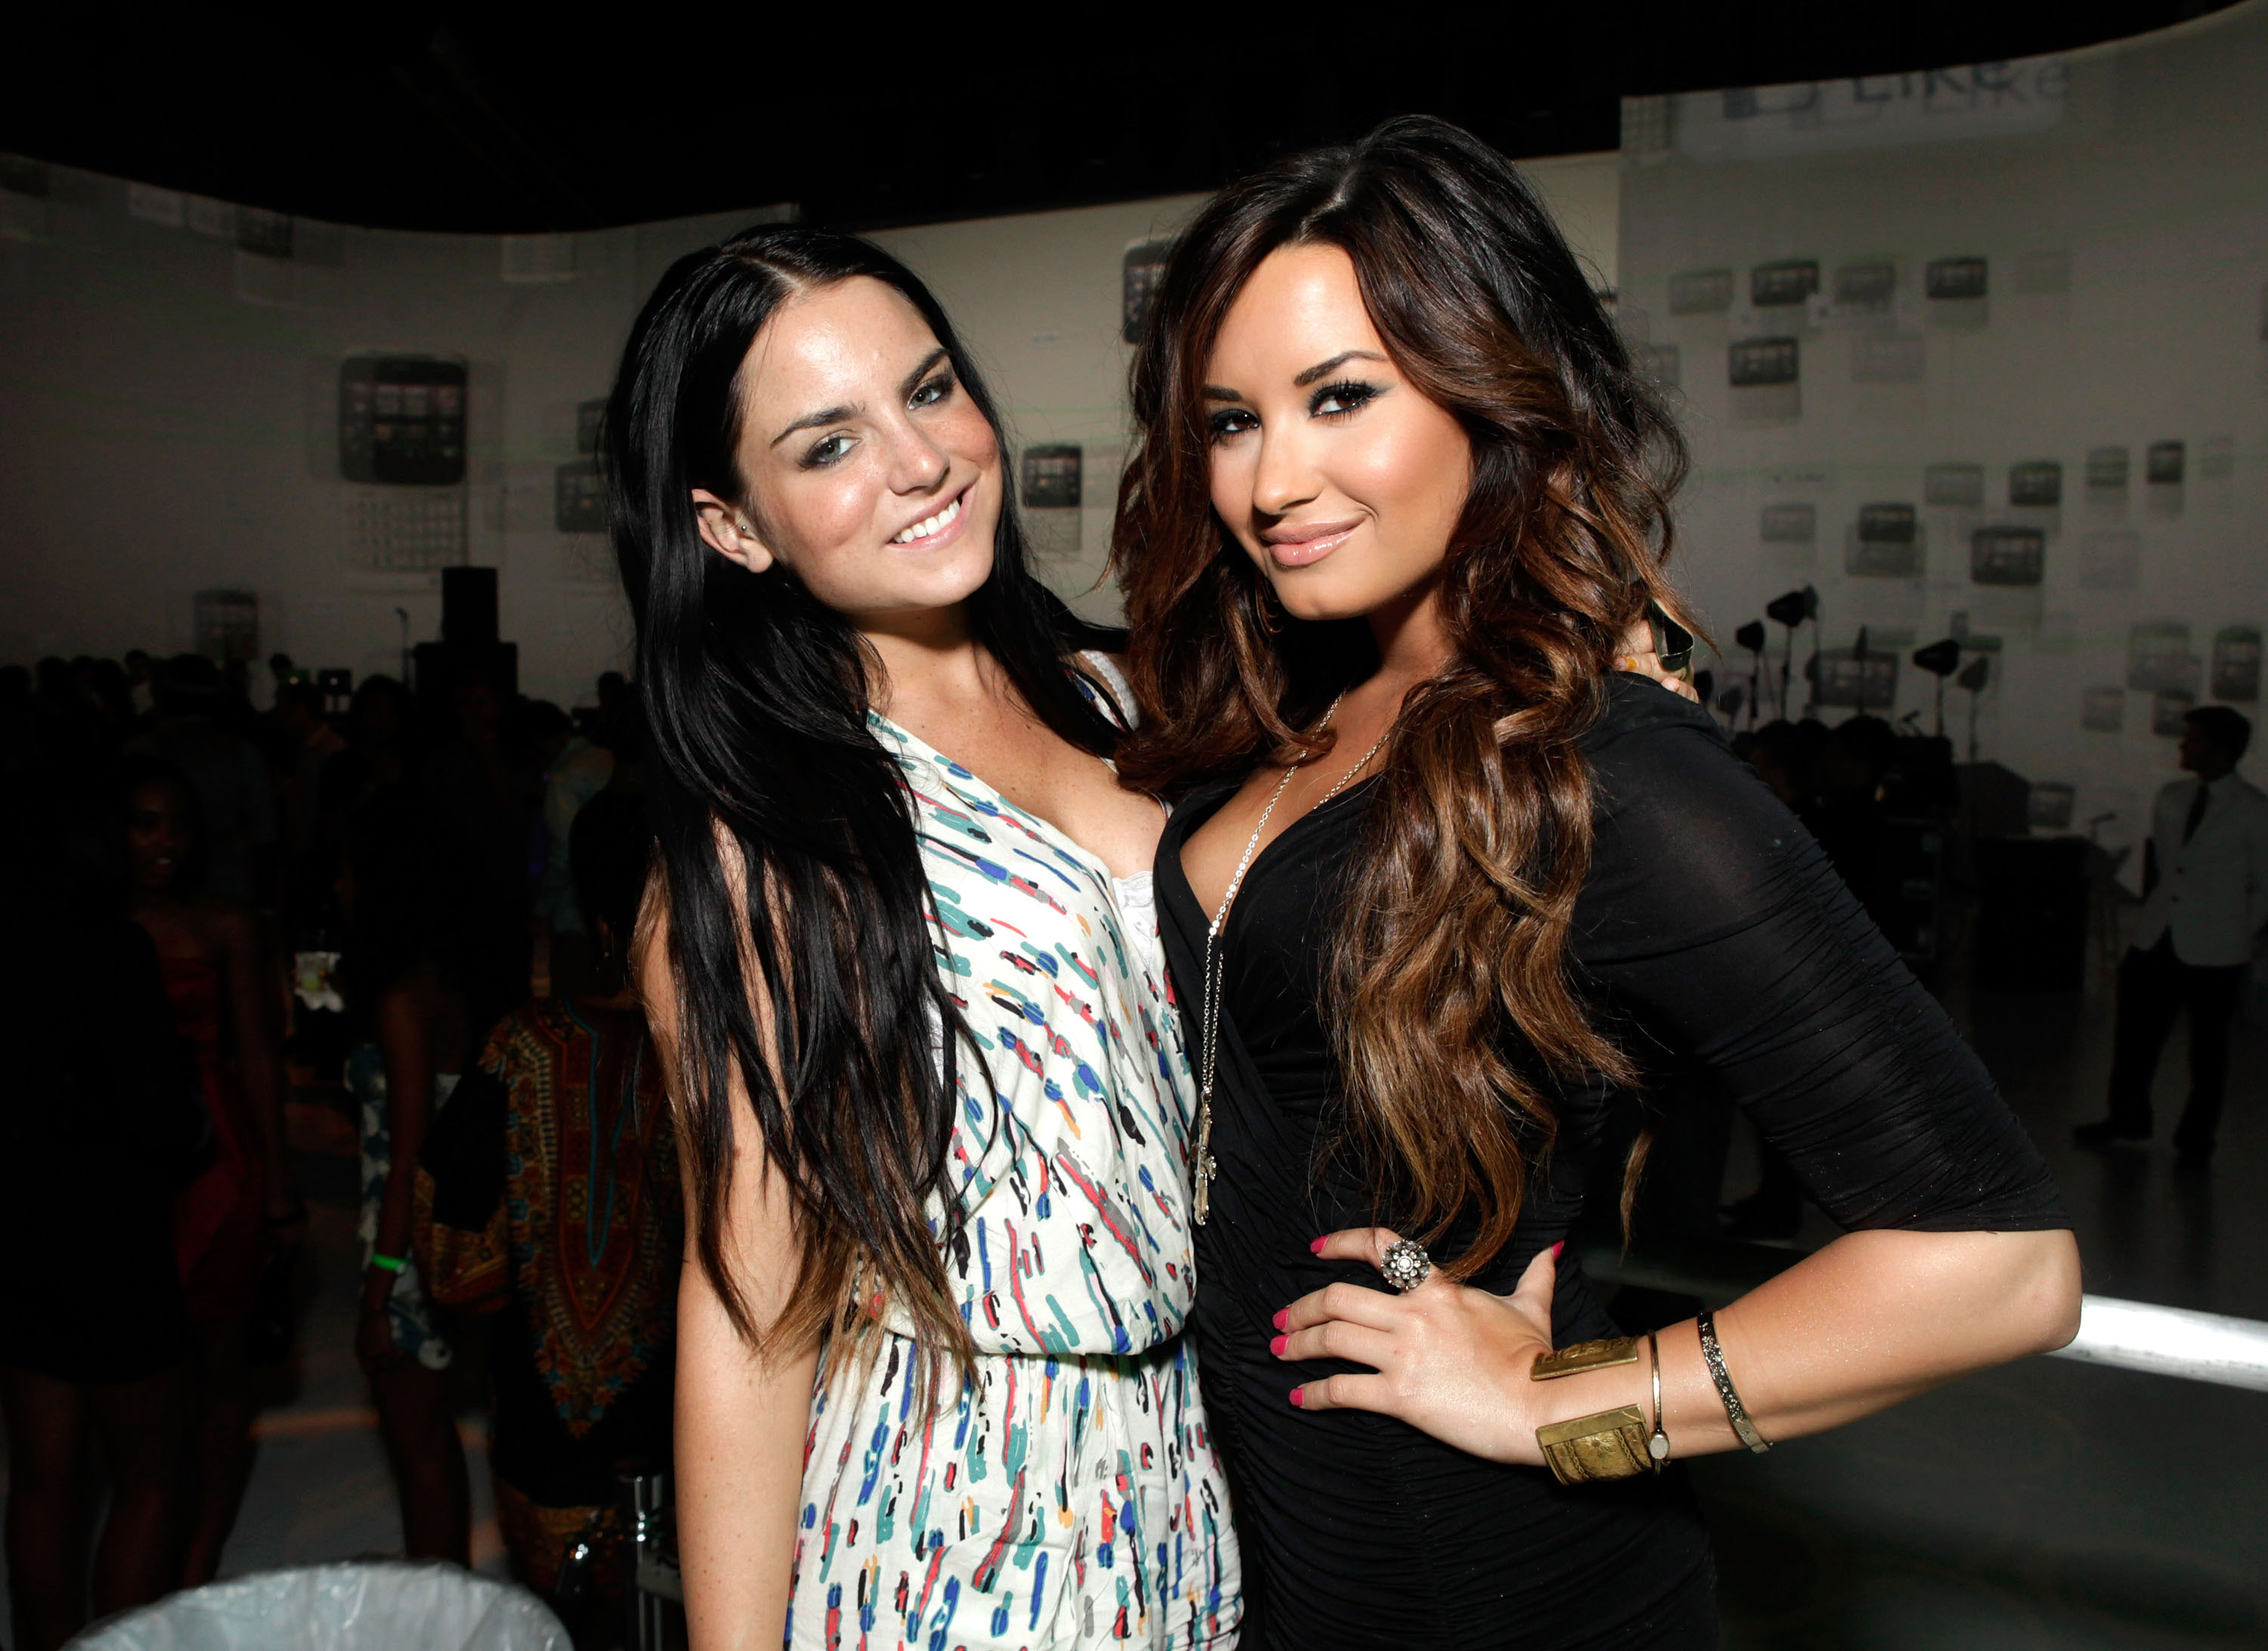 Singer JoJo (L) and singer/actress Demi Lovato attend the "HTC Status Social" Launch Event With Usher at Paramount Studios on July 19, 2011 in Hollywood, California. 